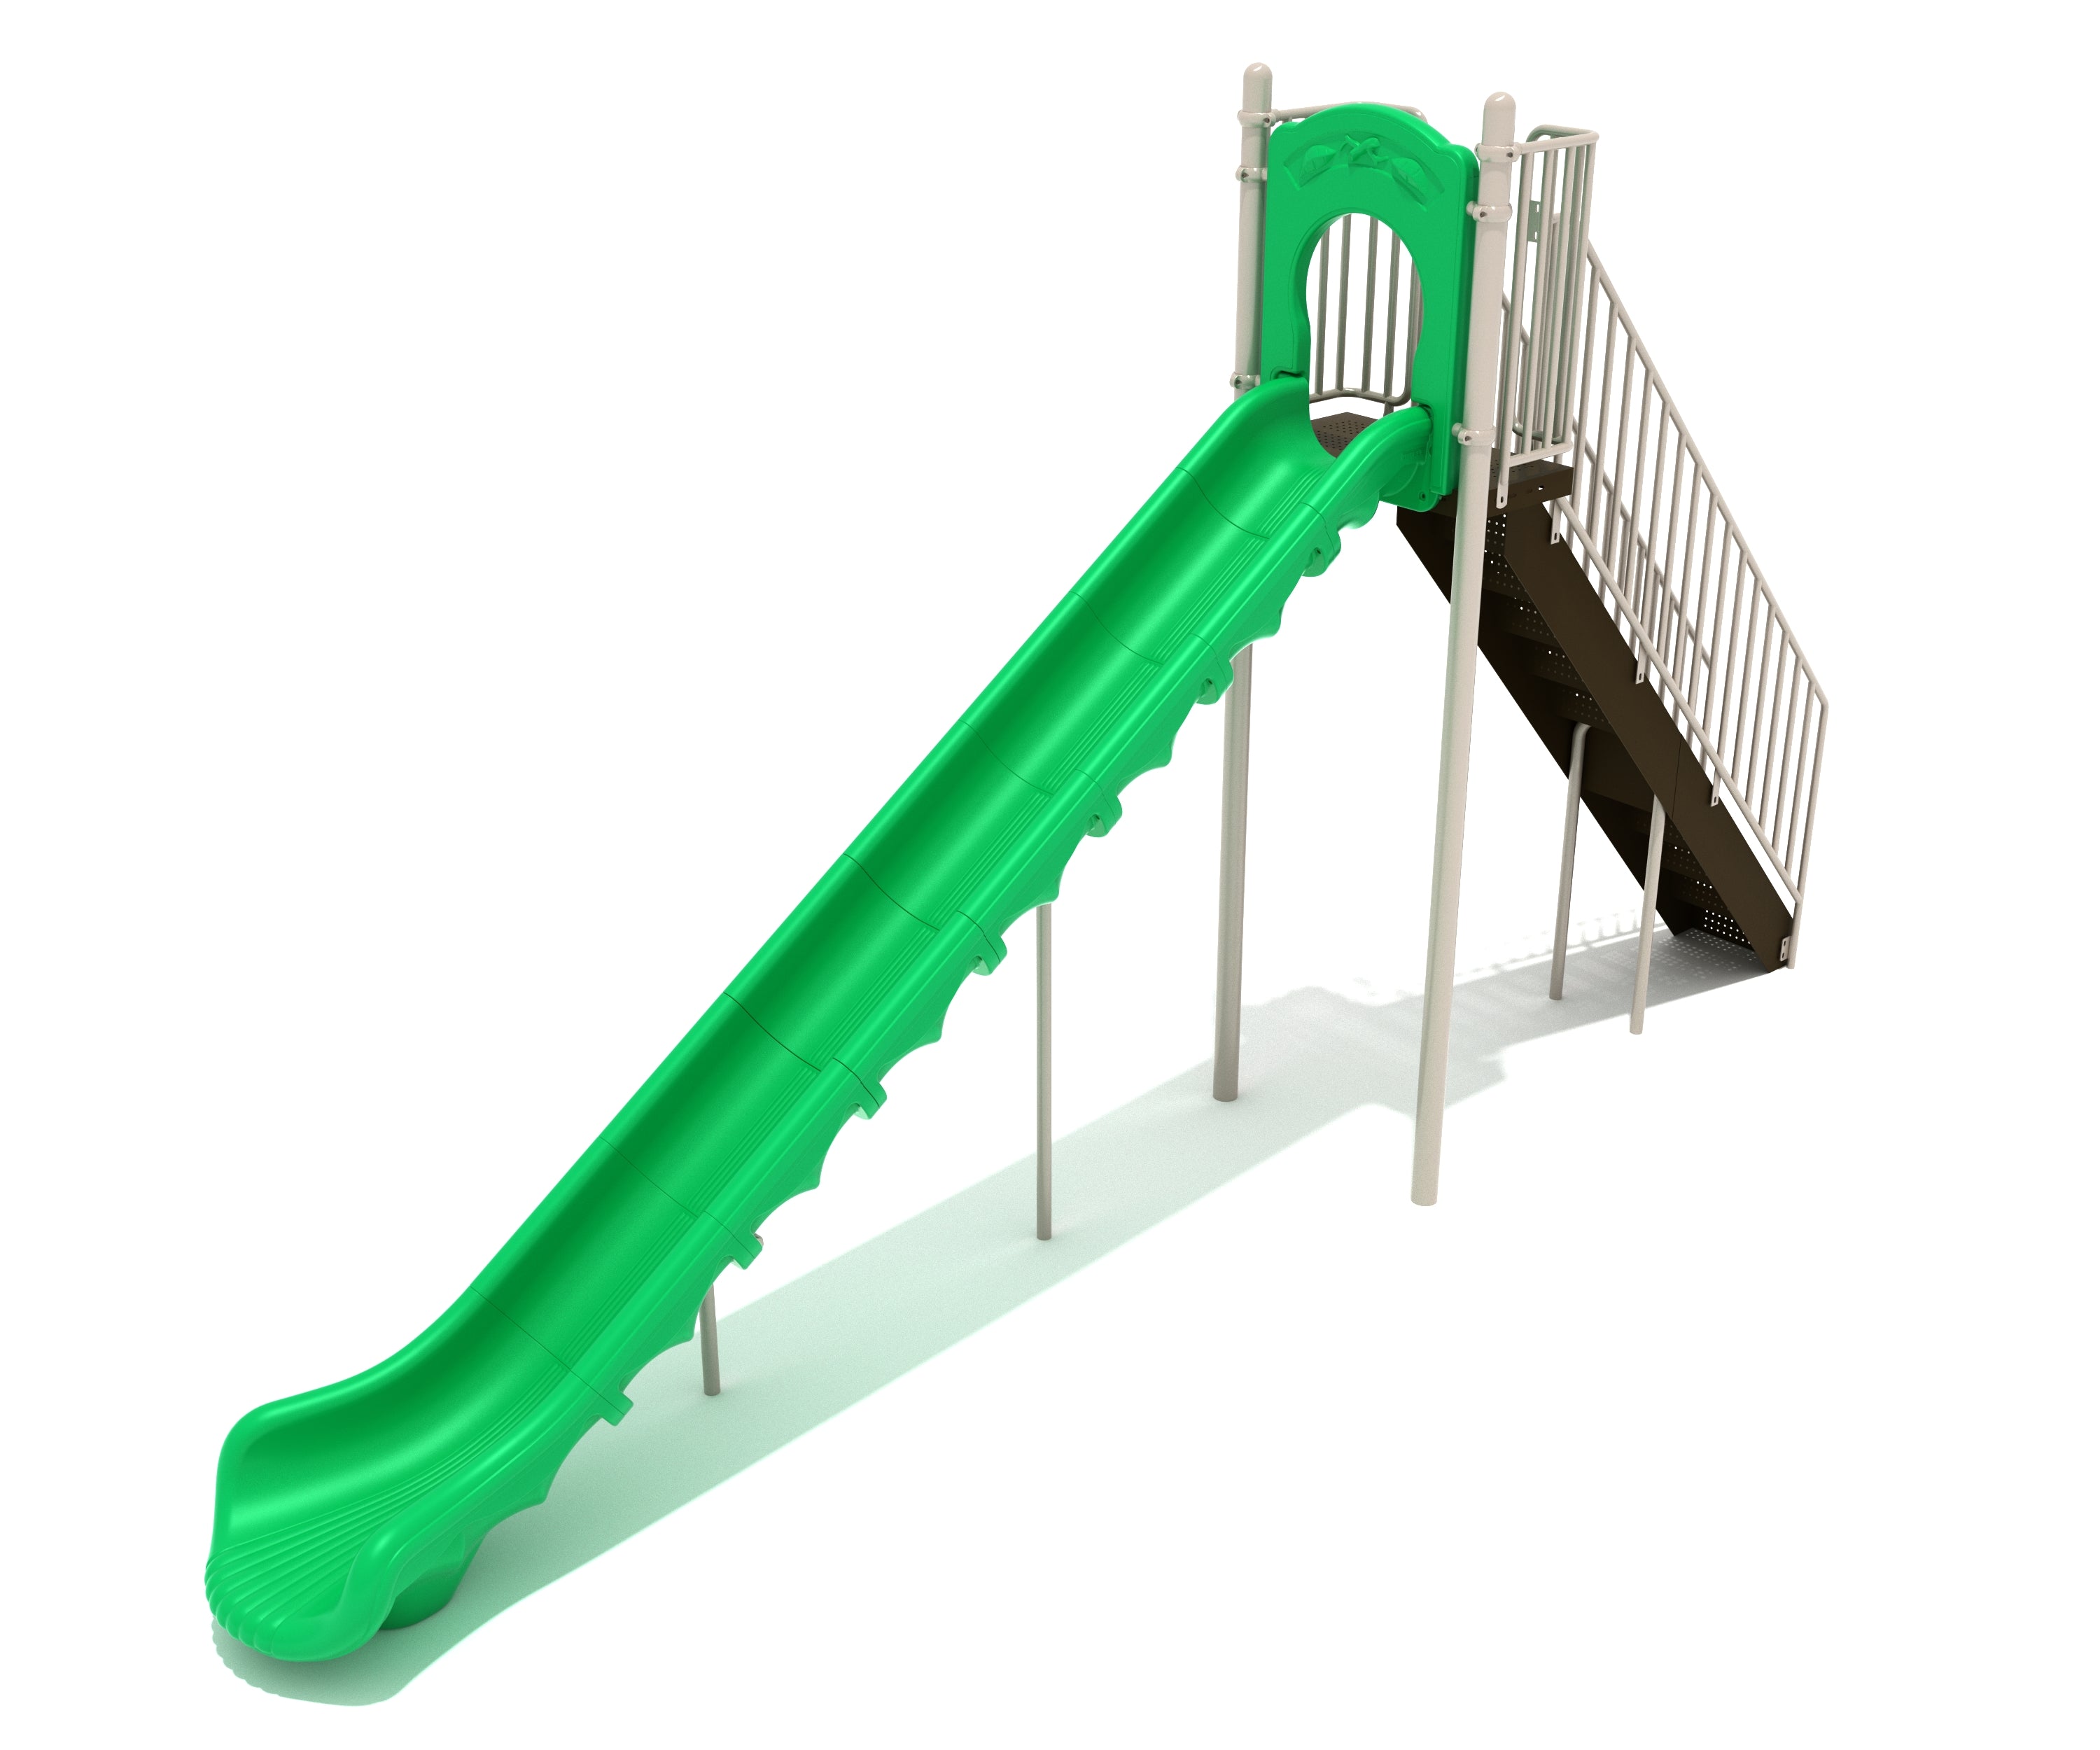 Sectional Straight Slide 8 Foot Deck